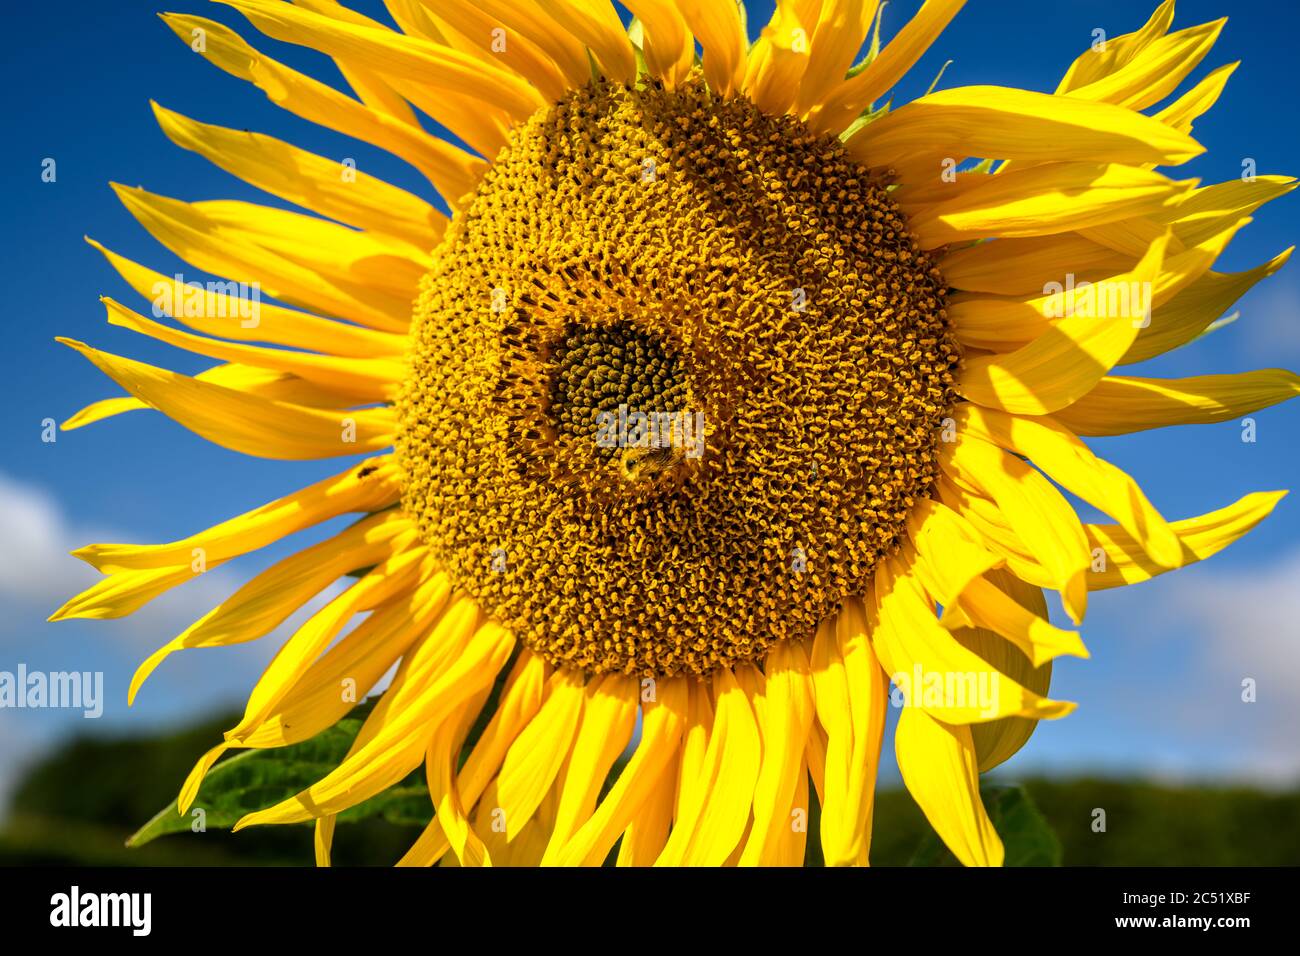 Slightly ragged Sunflower against a bright blue sky Stock Photo